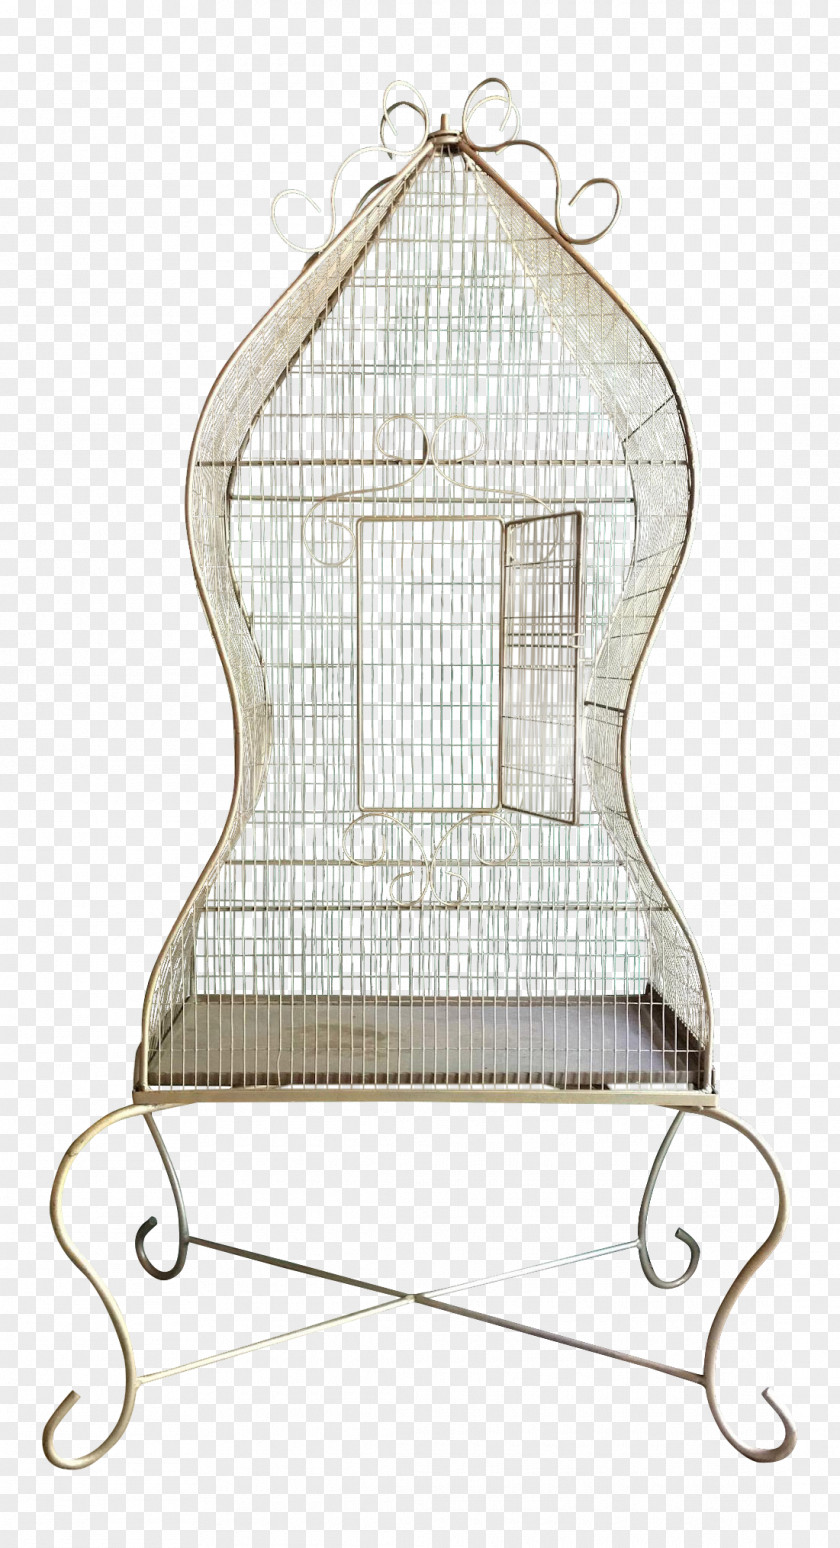 Chair Product Design Wicker Garden Furniture Cage PNG